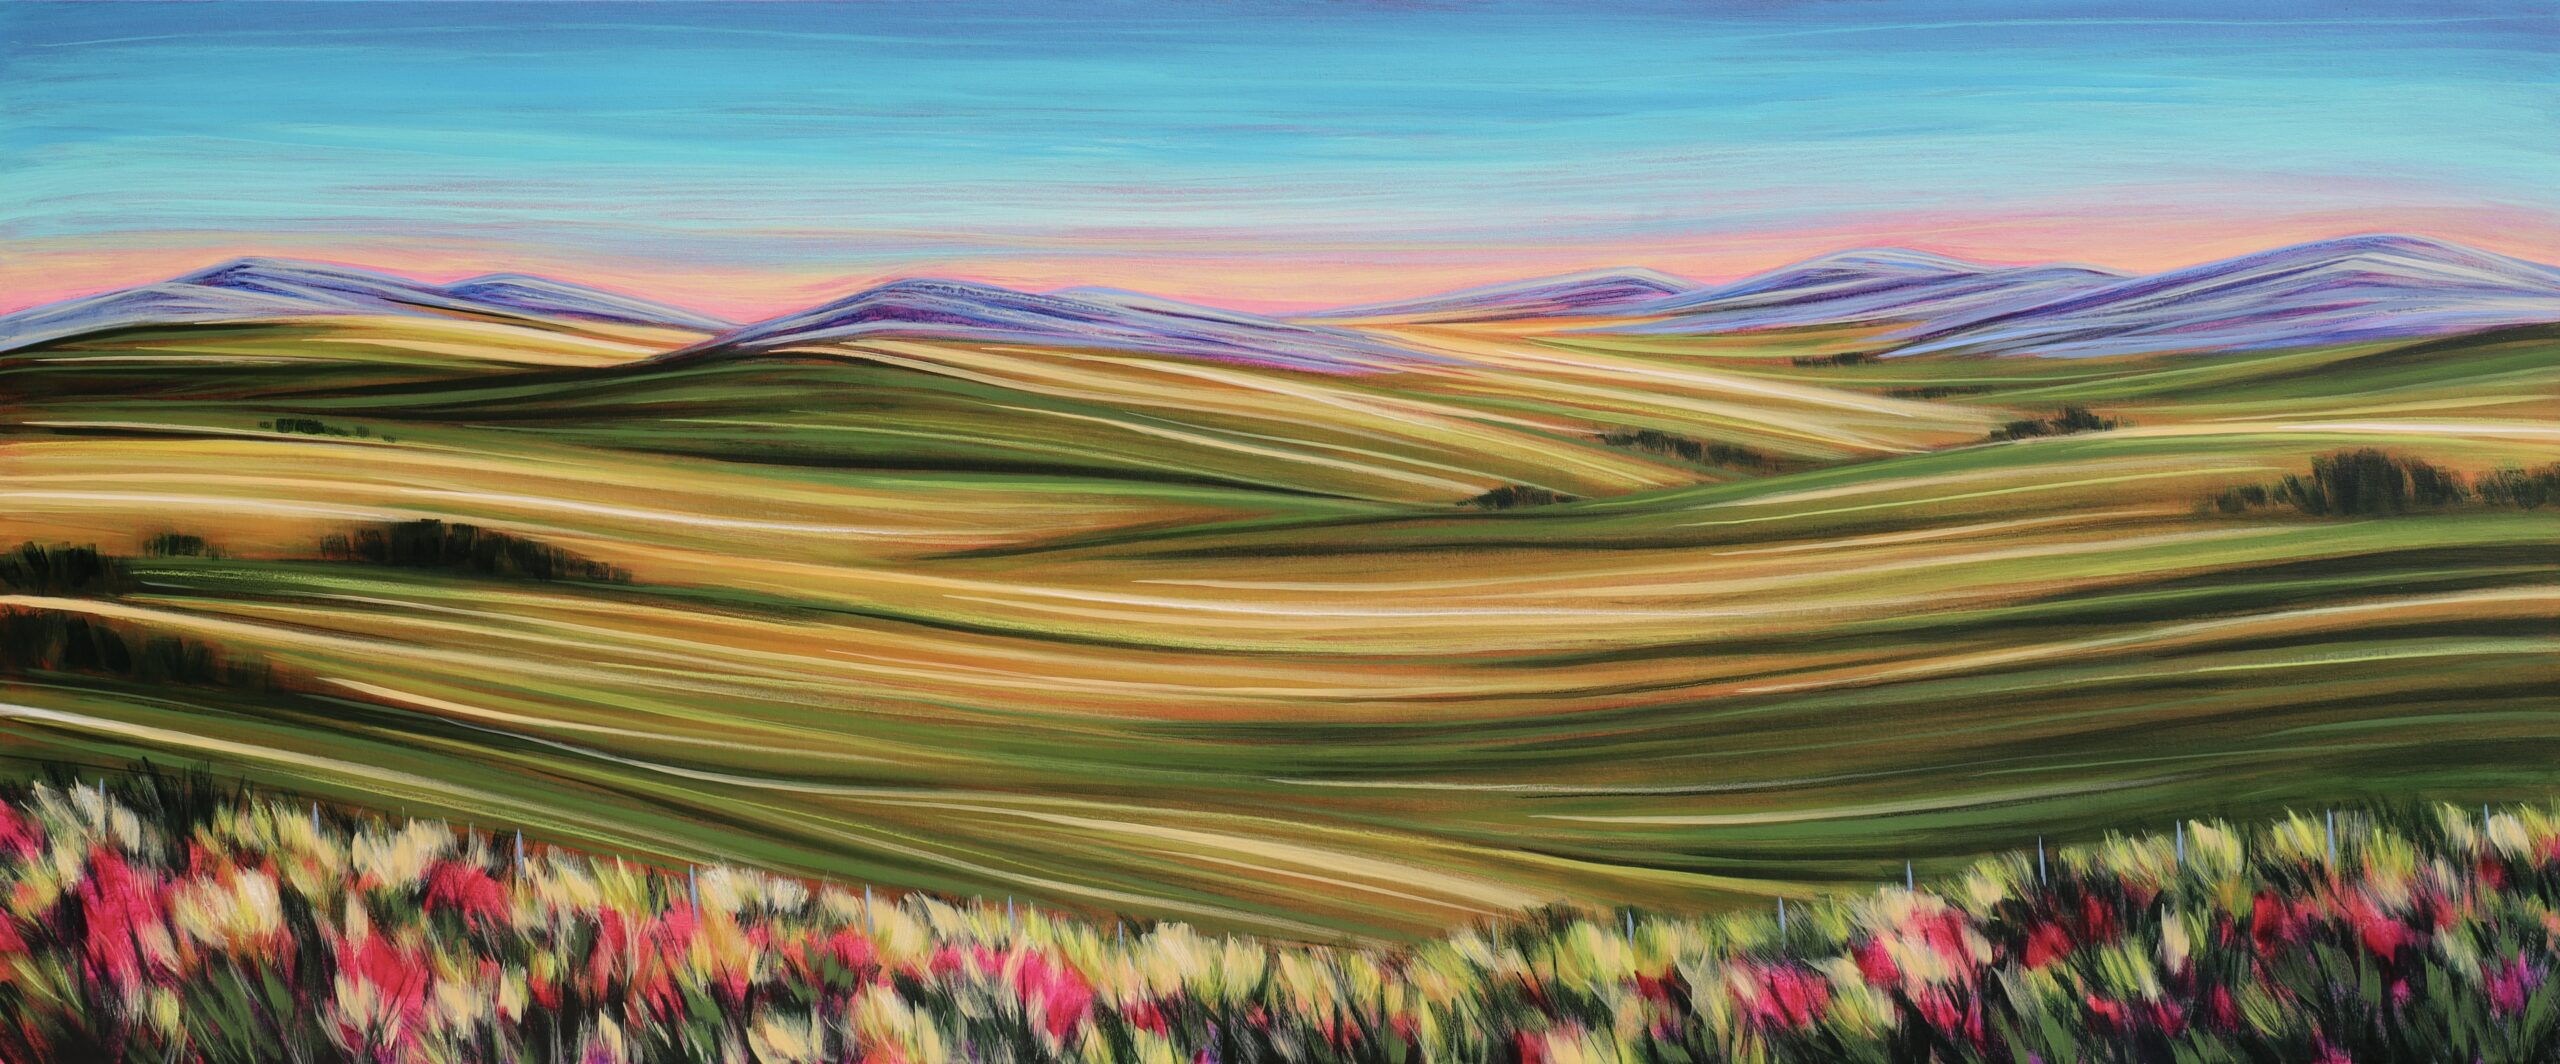 Kayla Eykelboom painting of green rolling prairie and the Alberta foothills with blue sky and colorful wildflowers.